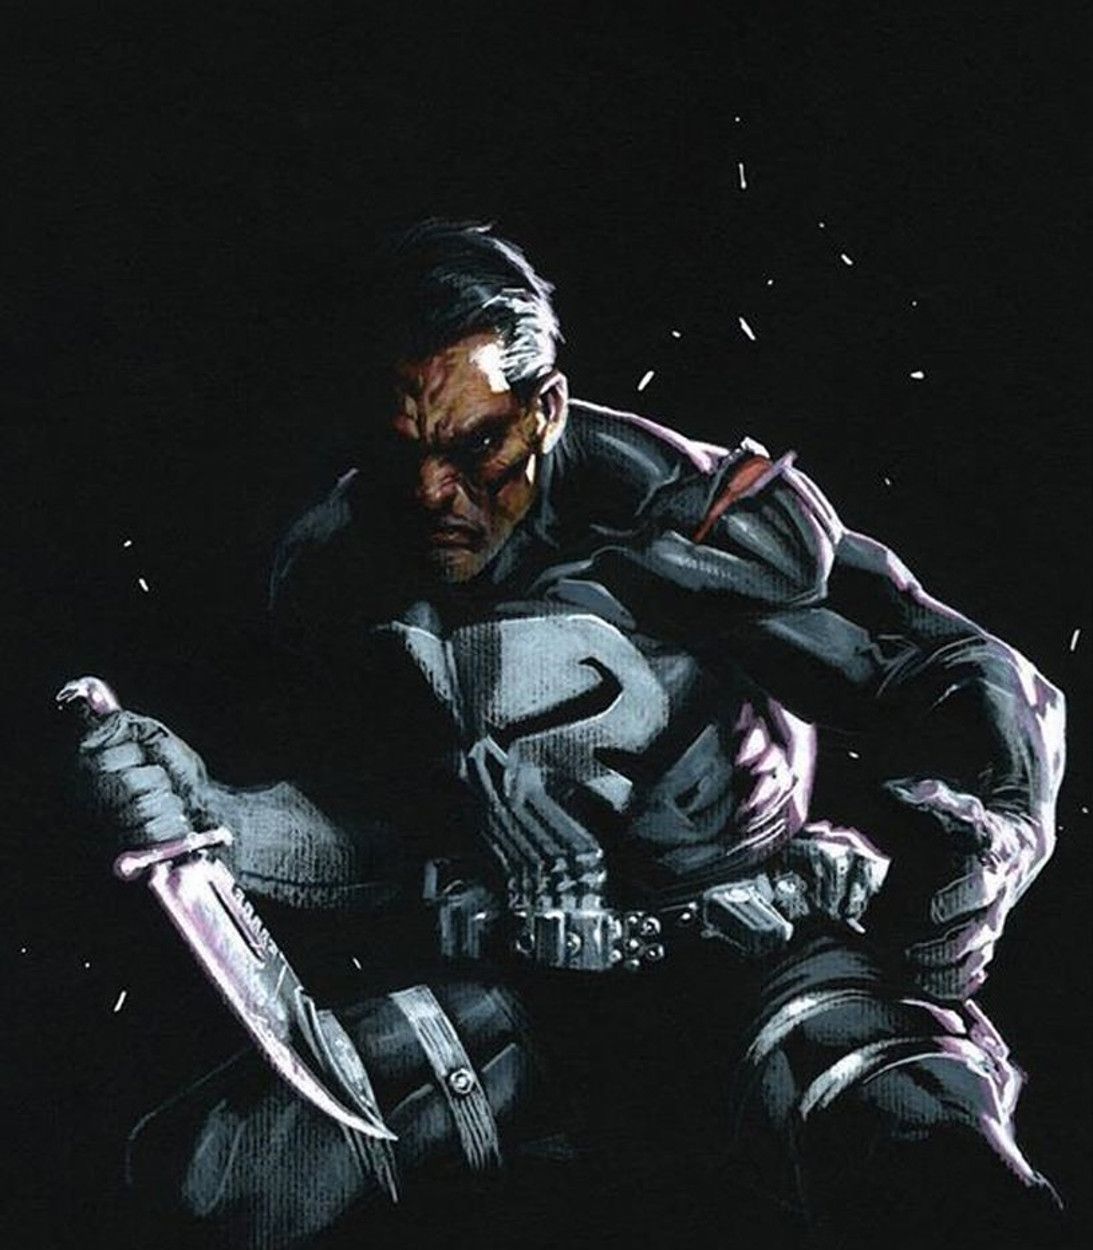 The Punisher vertical